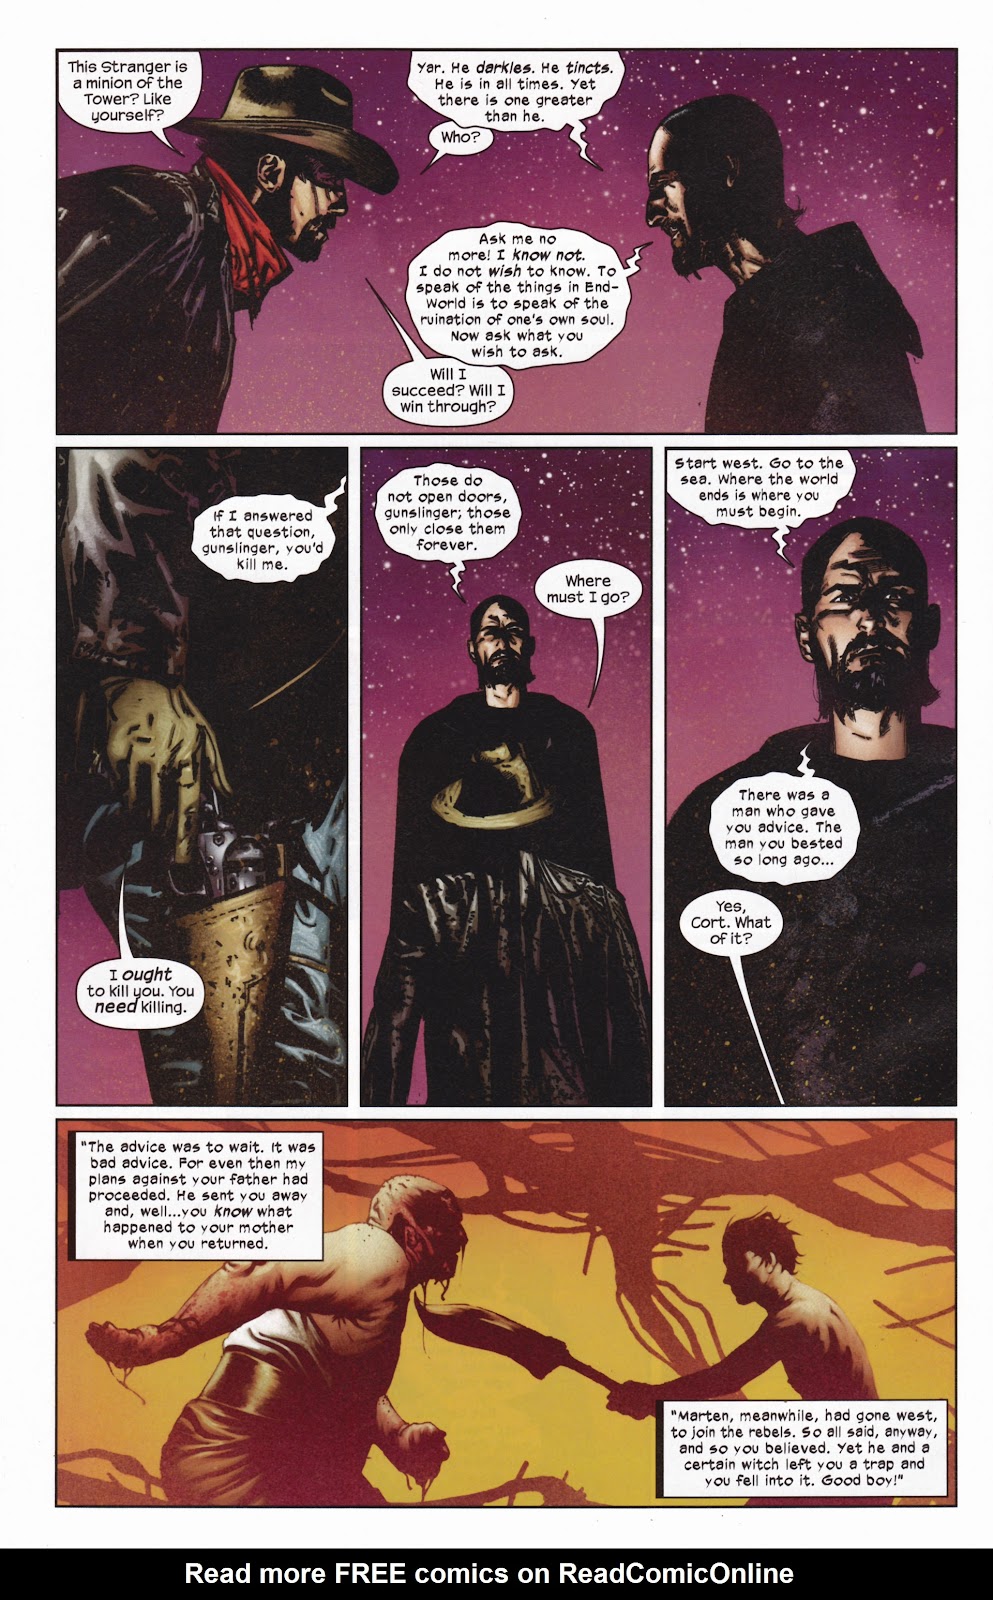 Dark Tower: The Gunslinger - The Man in Black issue 5 - Page 21